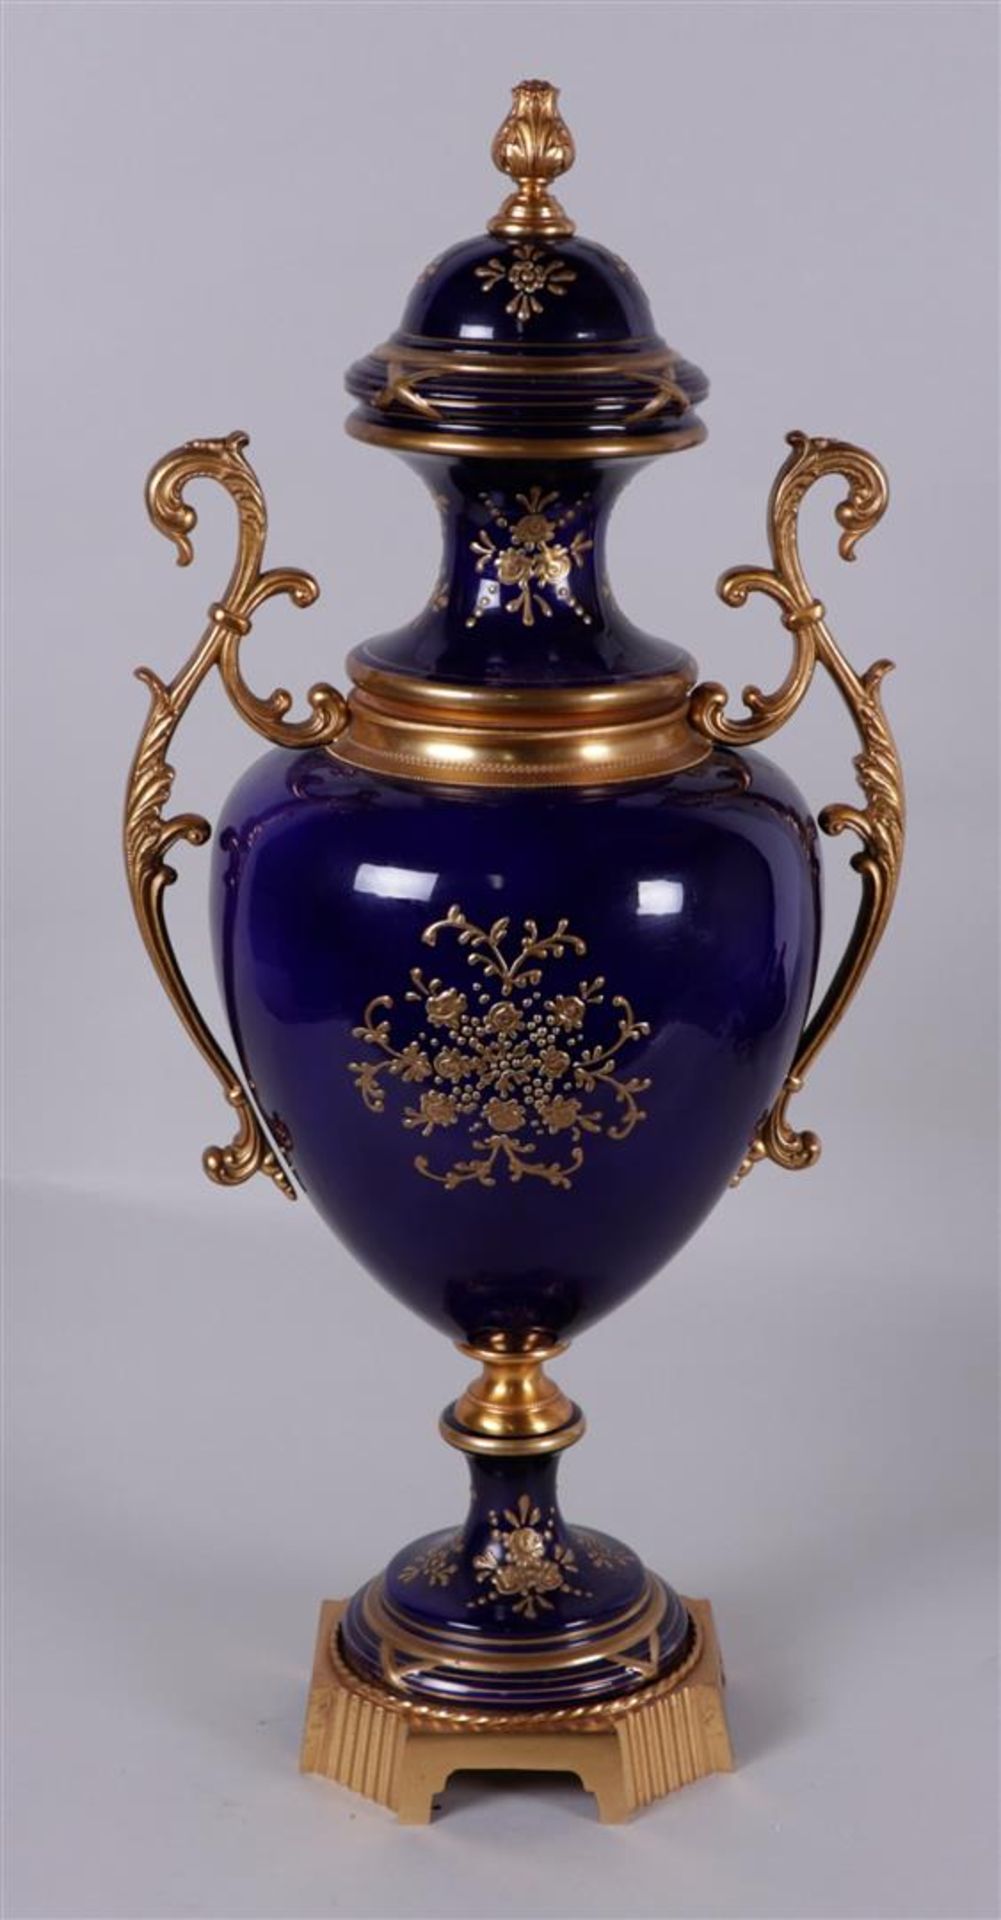 A Sevres-style lidded vase with brass frame.
H. 62 cm. - Image 3 of 3